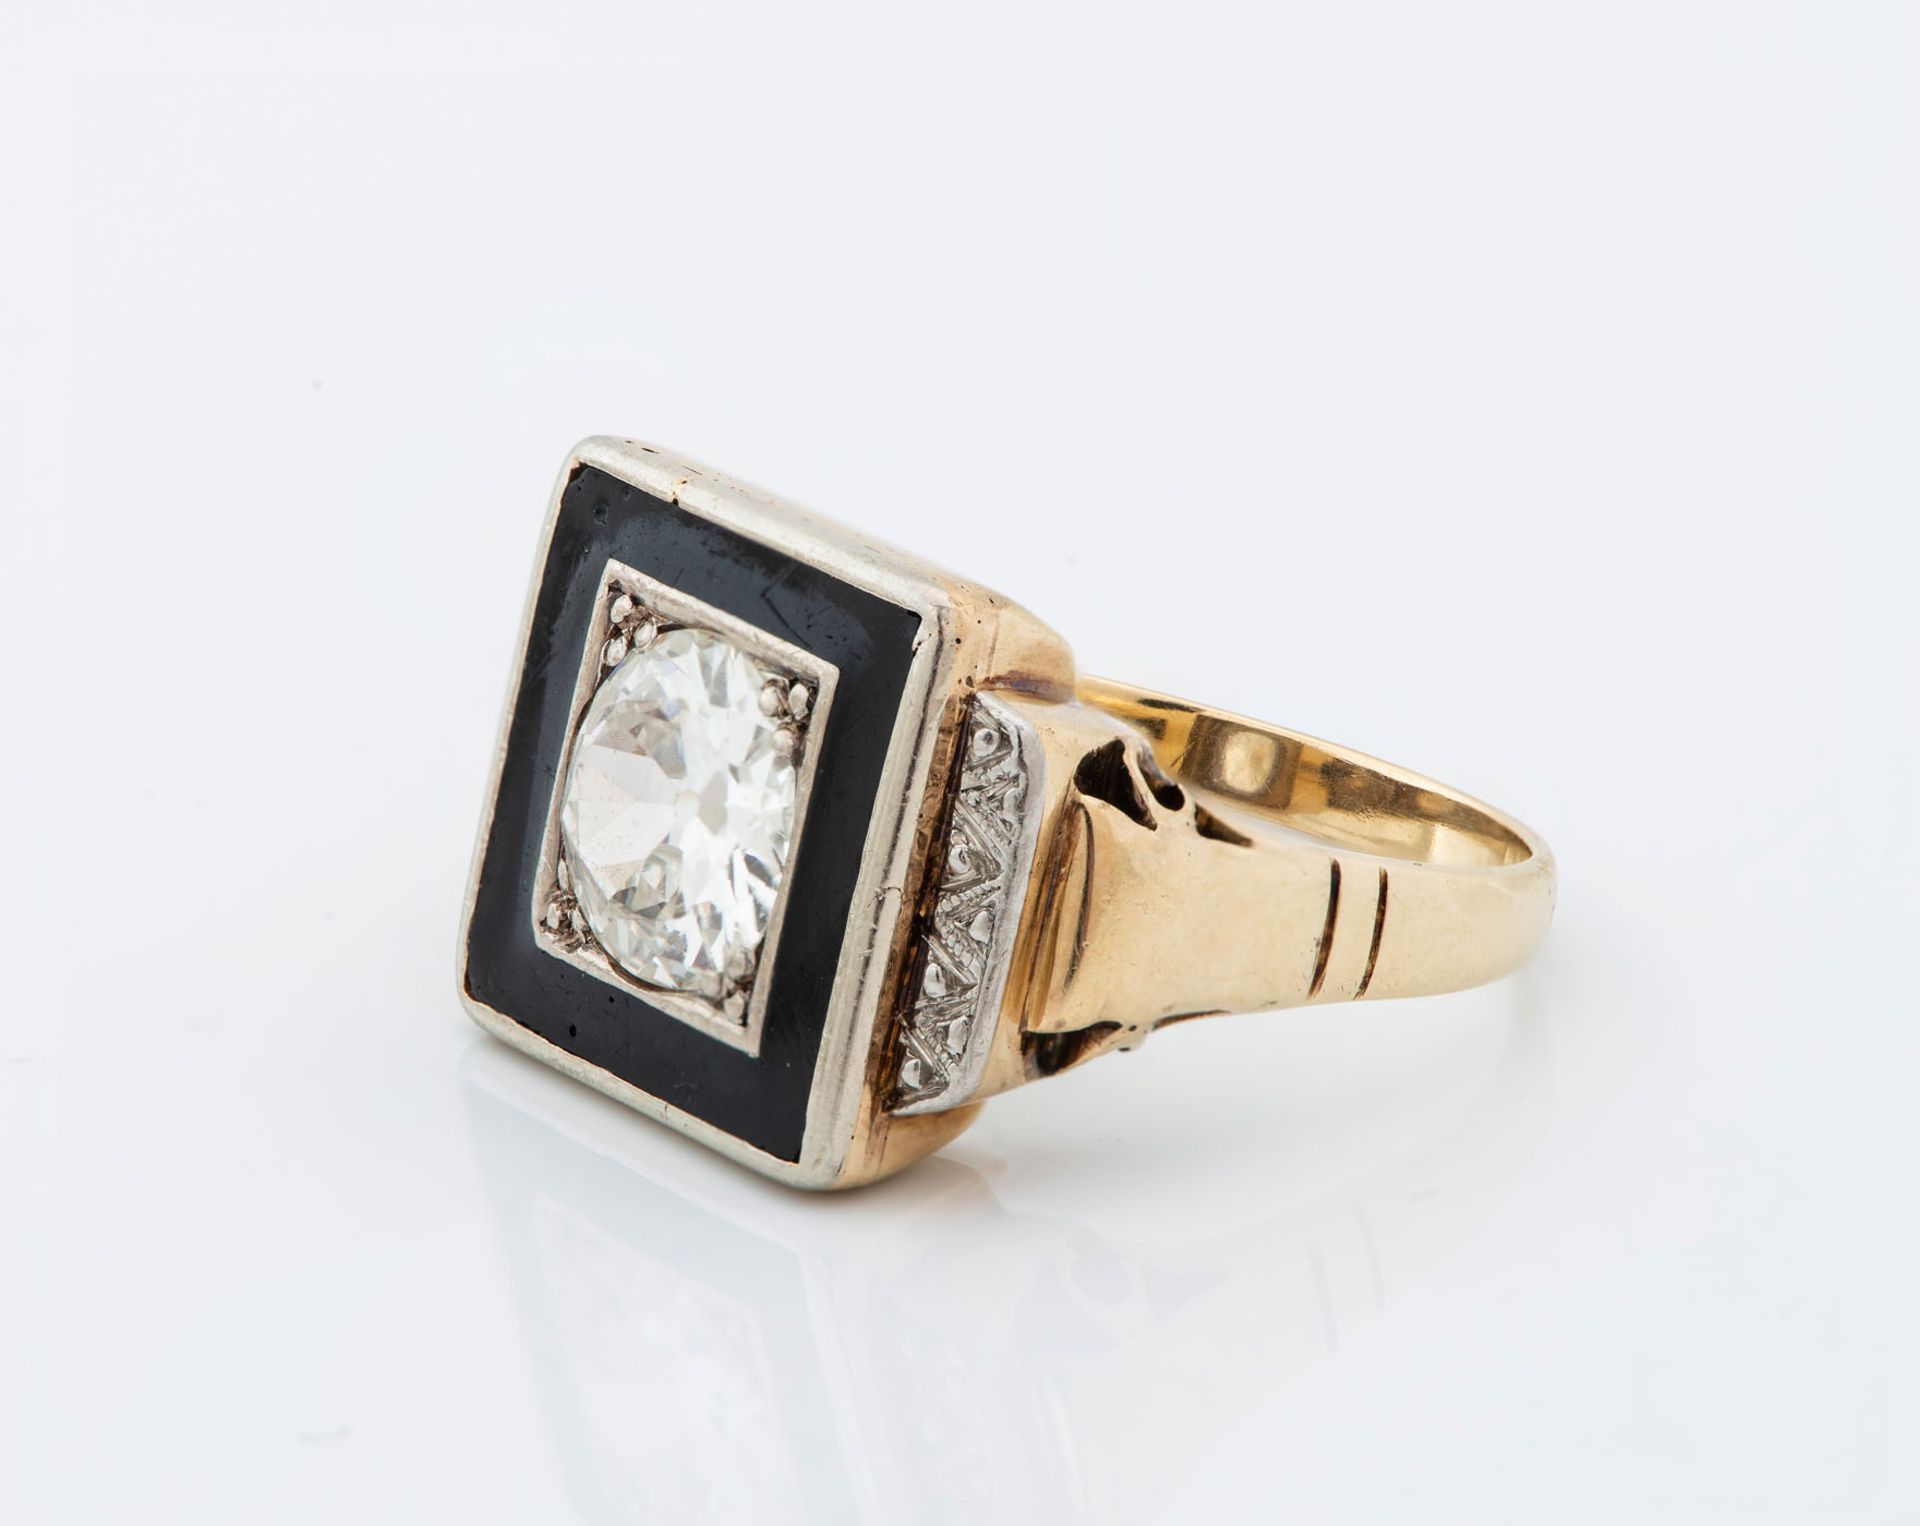 A Fine 14K Gold Diamond and Onyx Solitaire Ring - Image 3 of 4